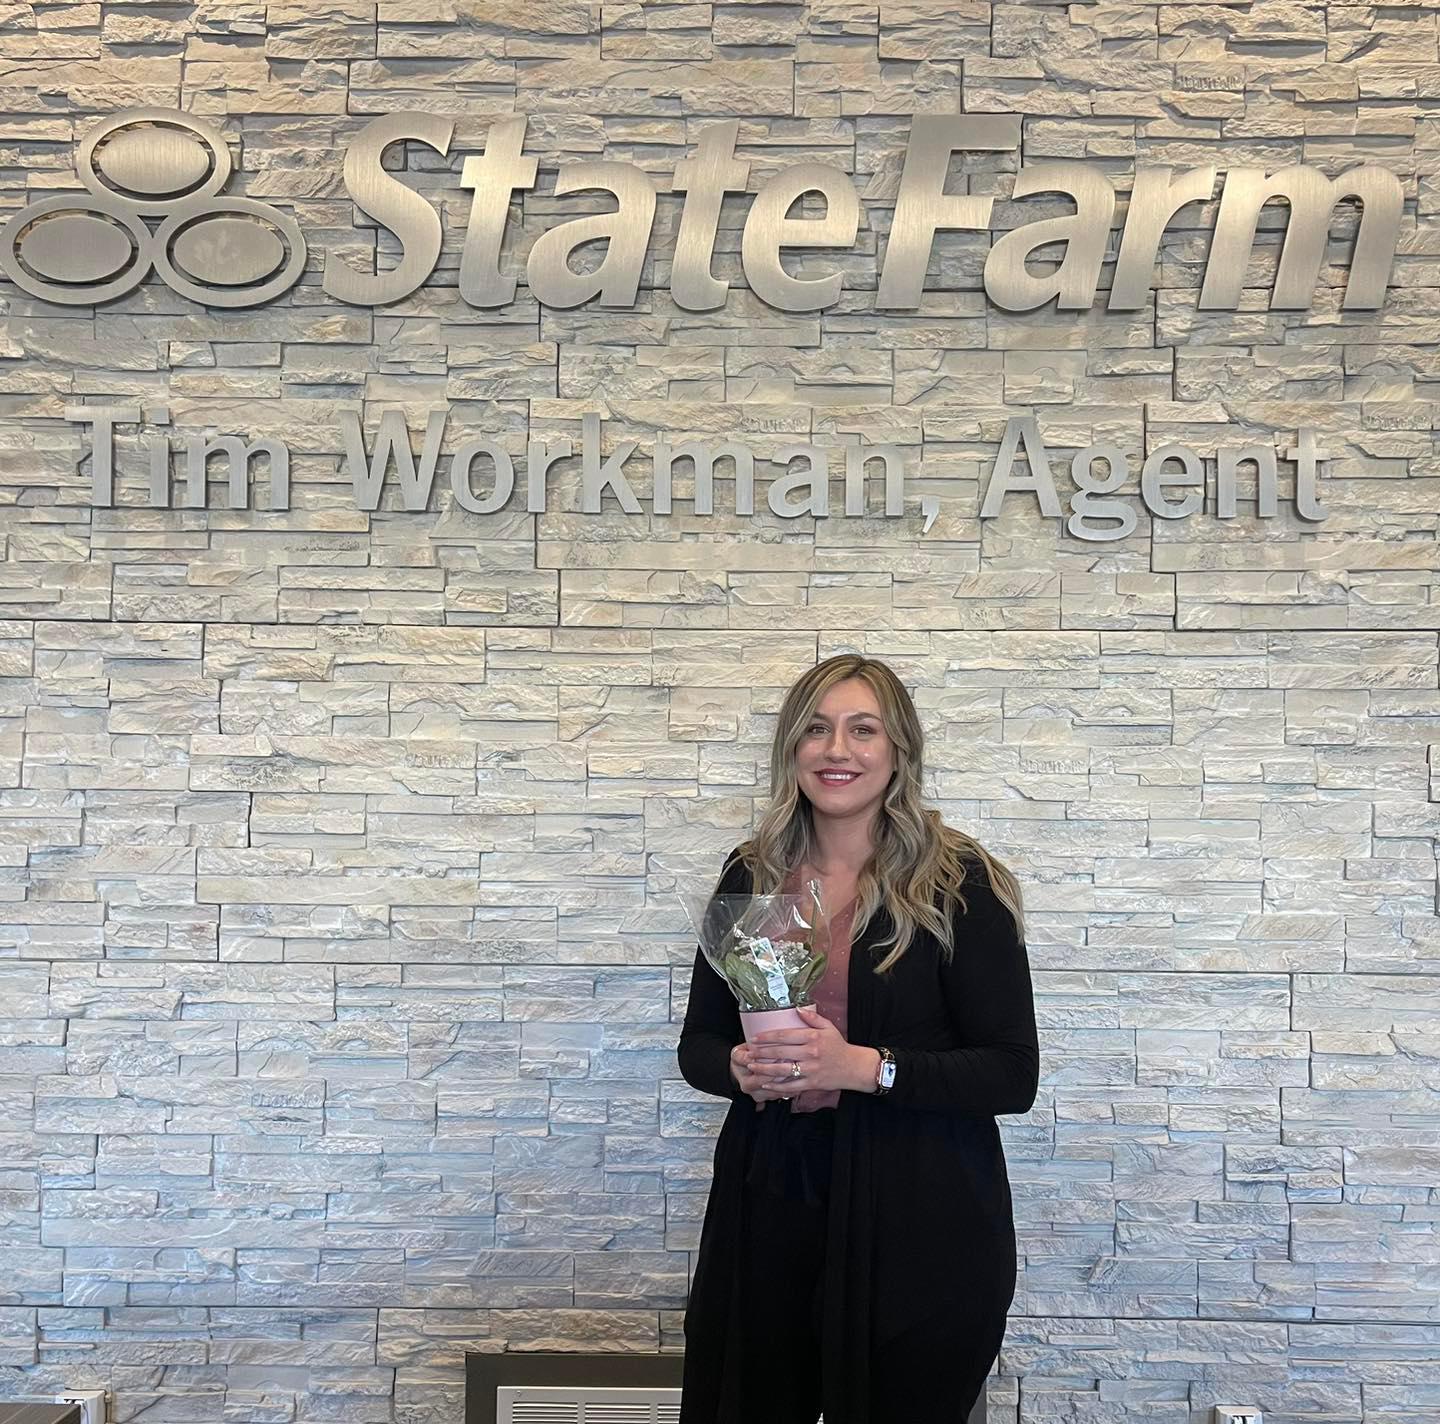 We wanted to take the time and thank our Customers, Terri and Dan for thinking of our Agent Mileena and bringing her an African Violet for Valentine’s Day! We are very grateful to have the opportunity to provide them with a memorable experience!